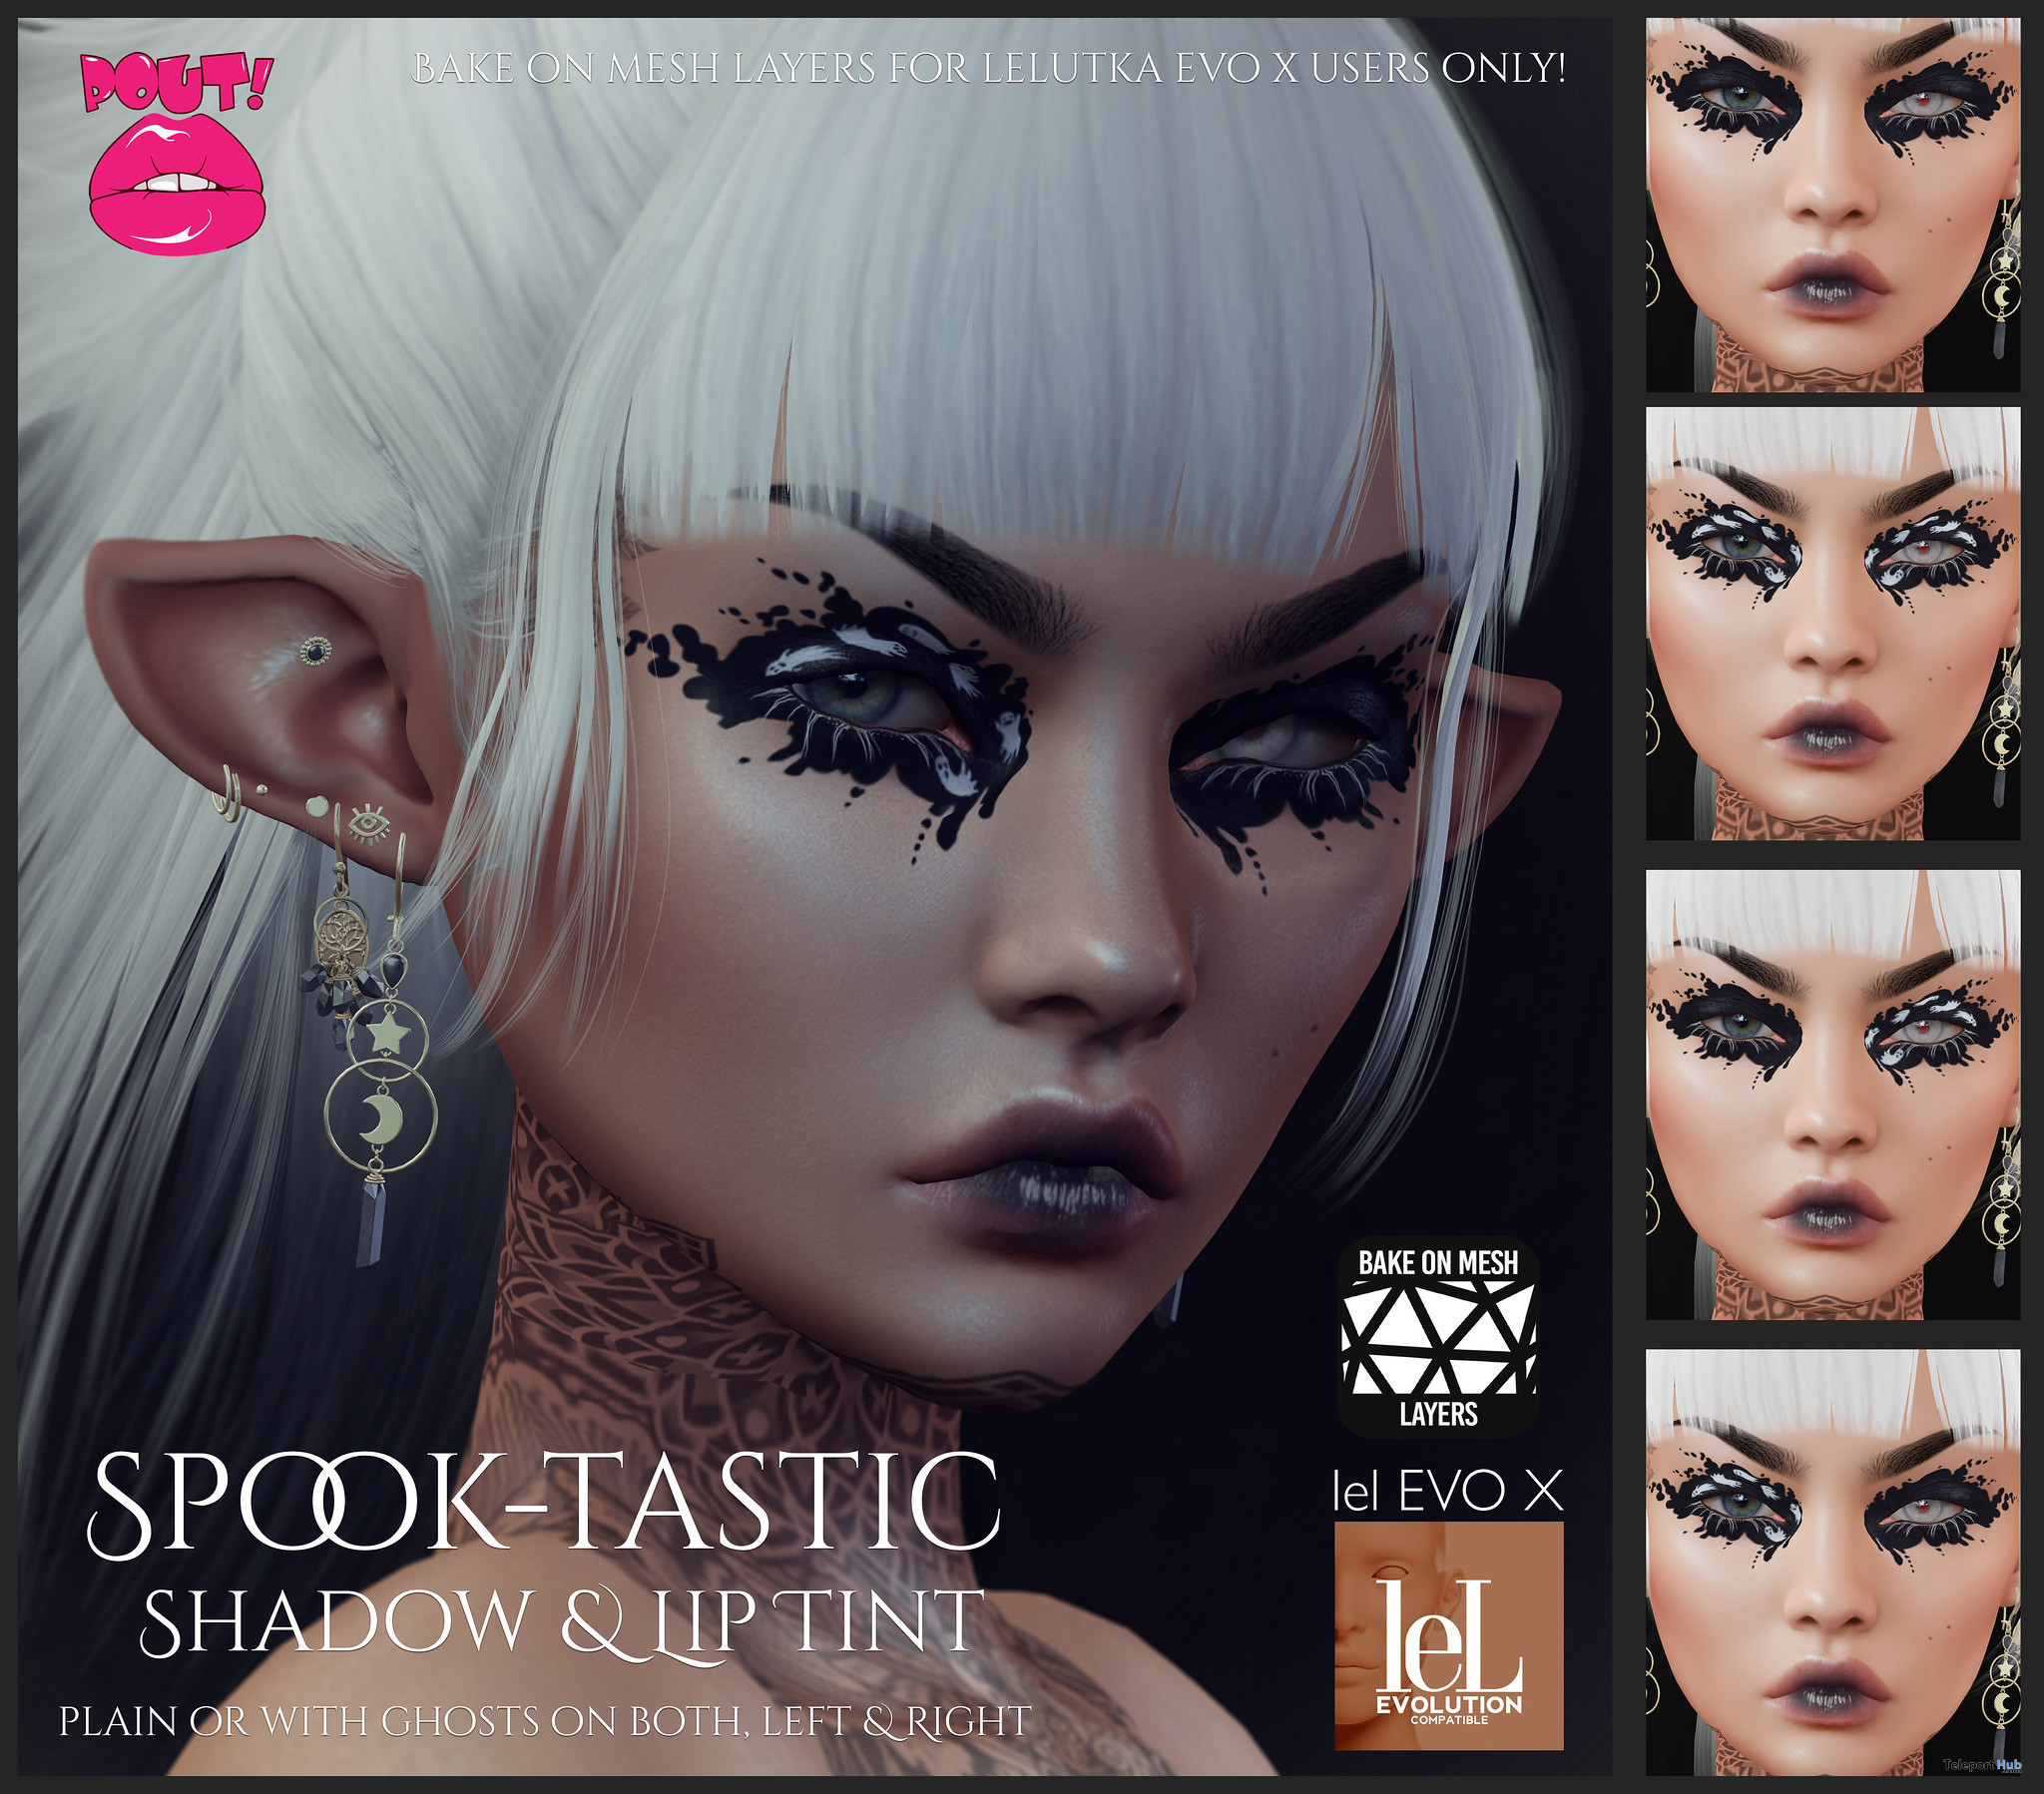 Spook-tastic Shadow & Lips October 2021 Group Gift by POUT! - Teleport Hub - teleporthub.com